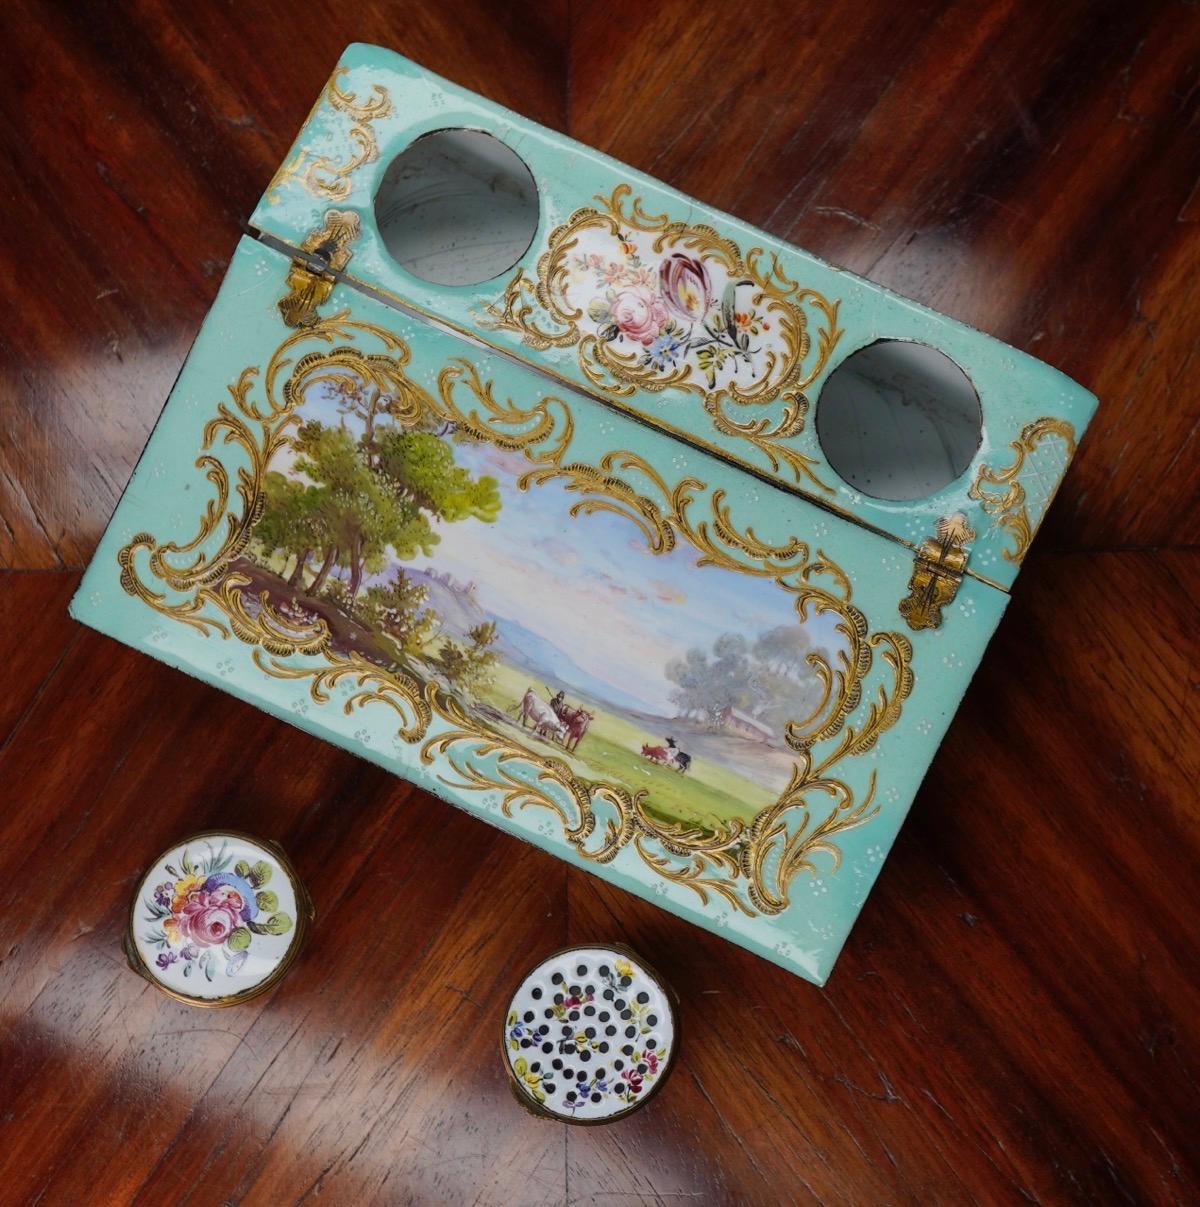 Late 18th Century Rare English Enamel Writing Slope/ Box, Landscapes and Scrollwork, circa 1780